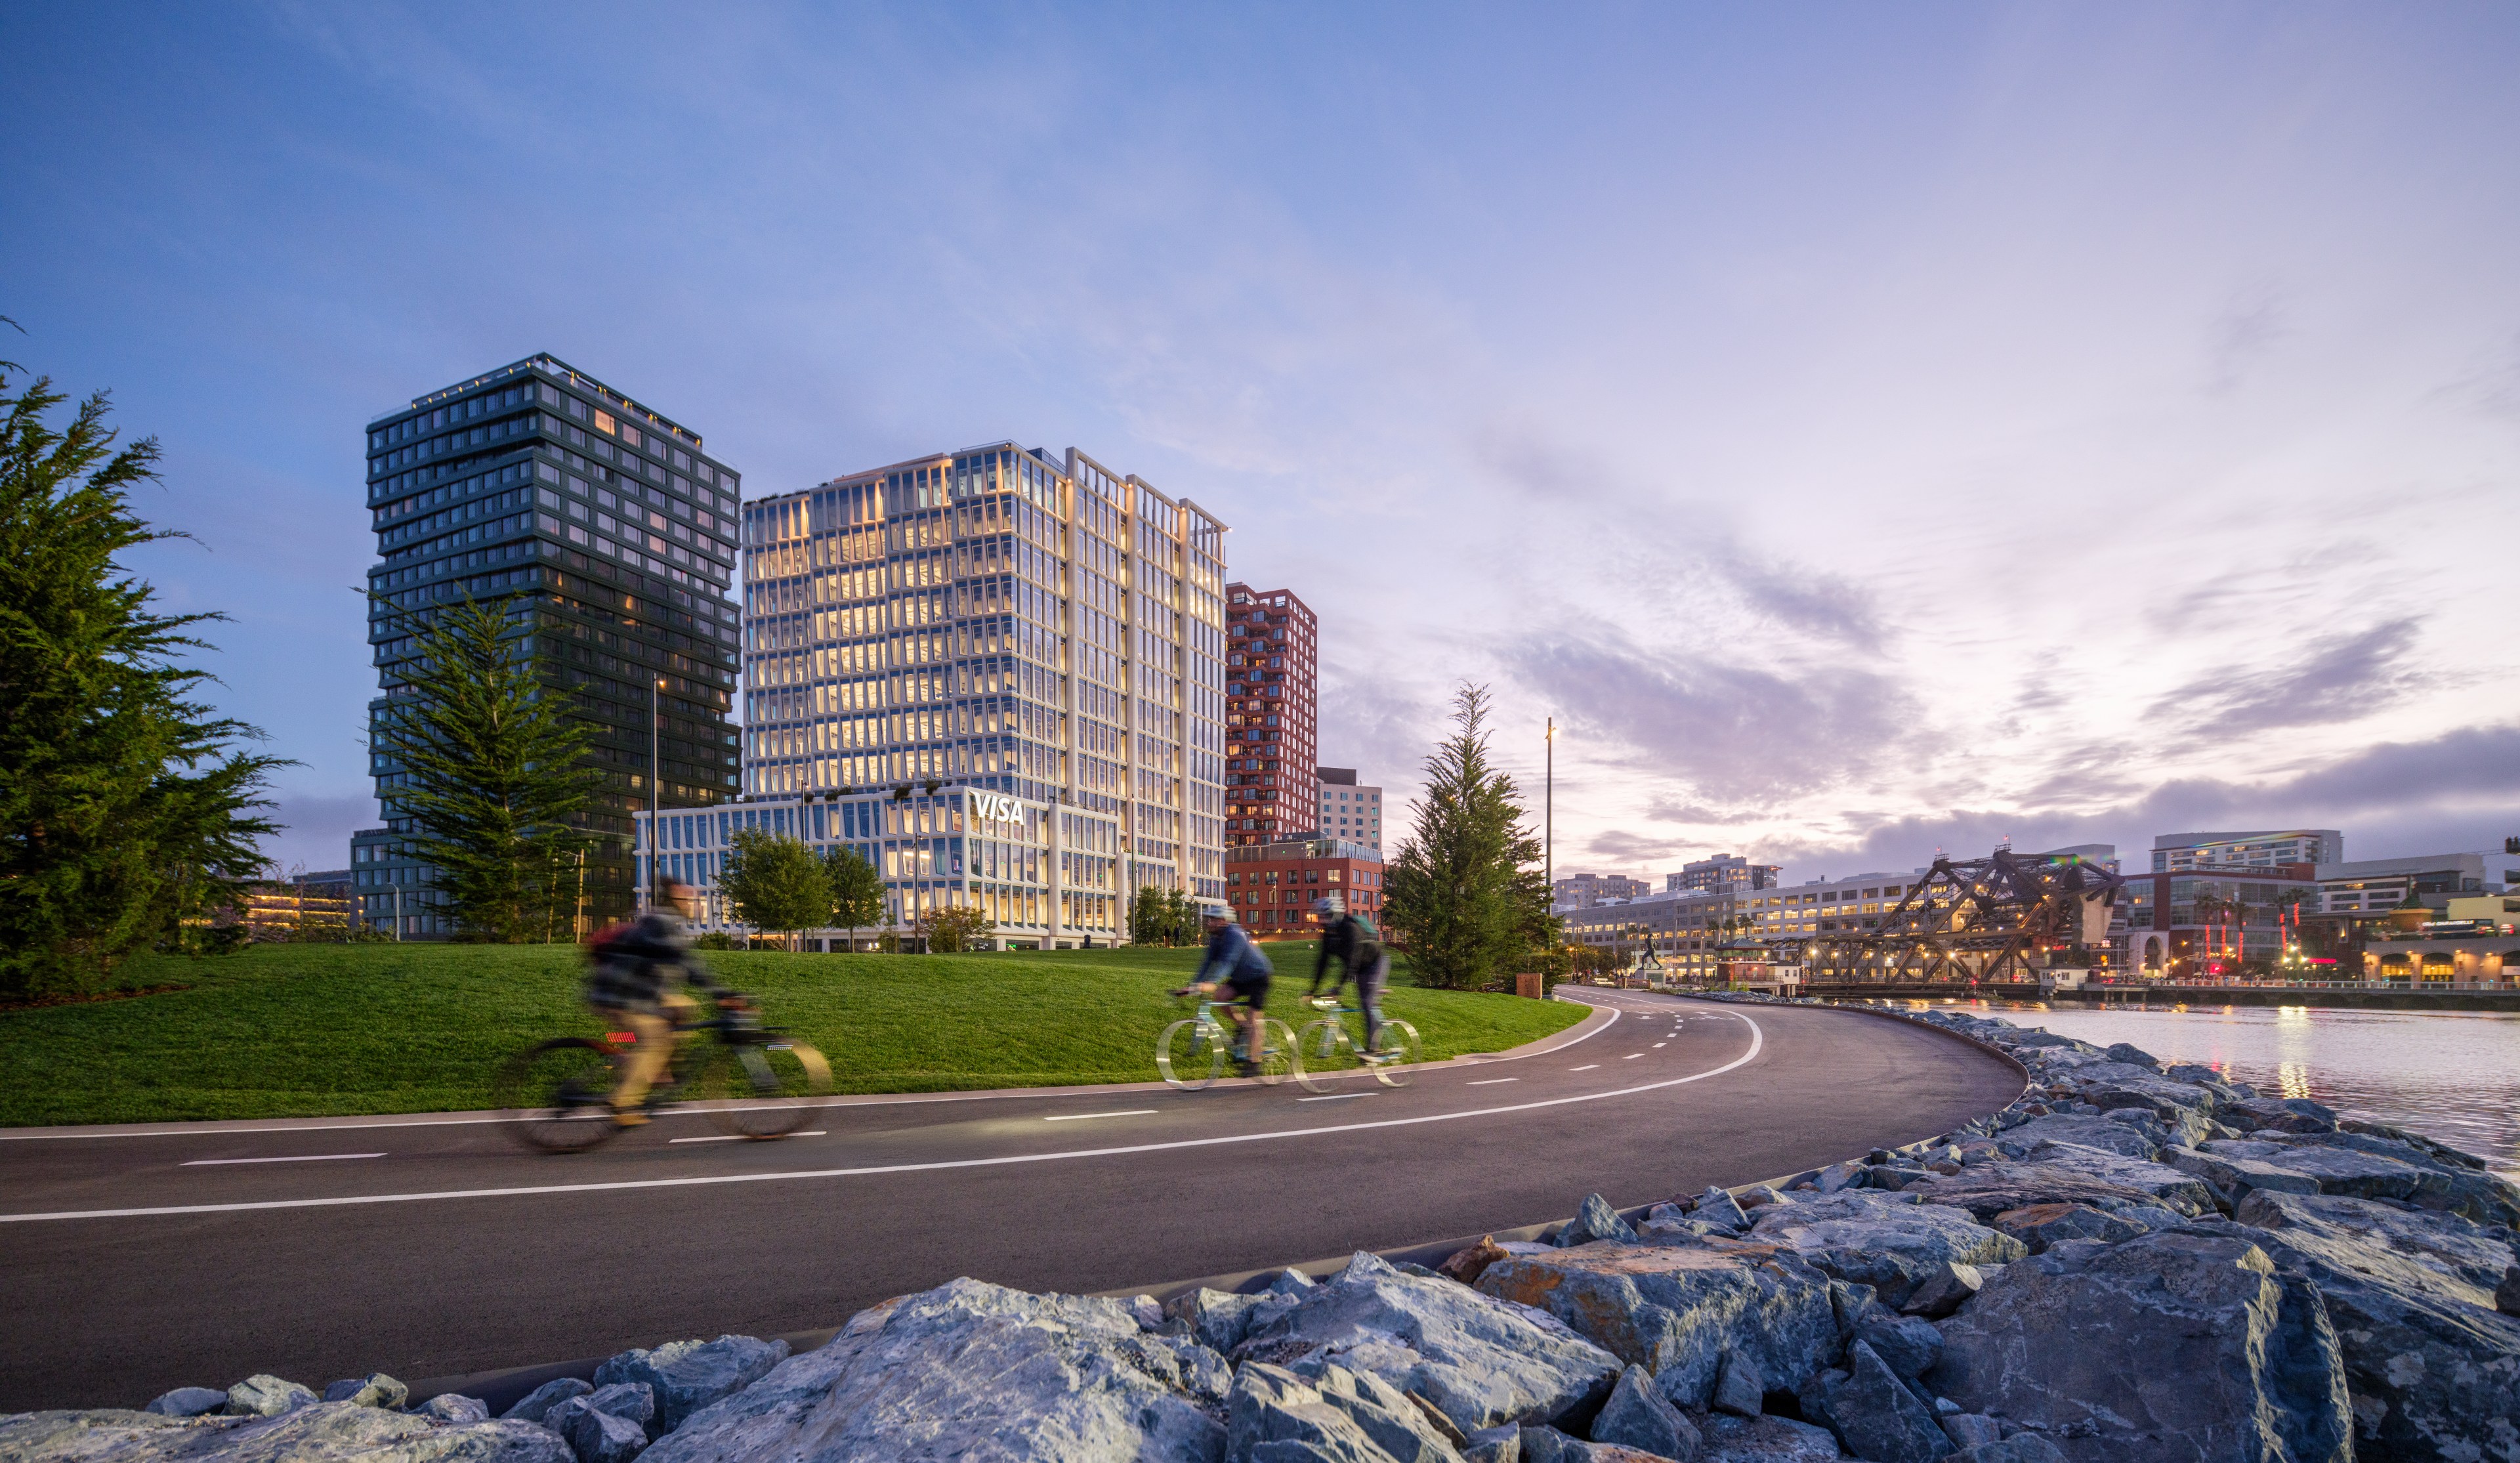 Seaside path with cyclists, modern buildings, and a sunset sky.